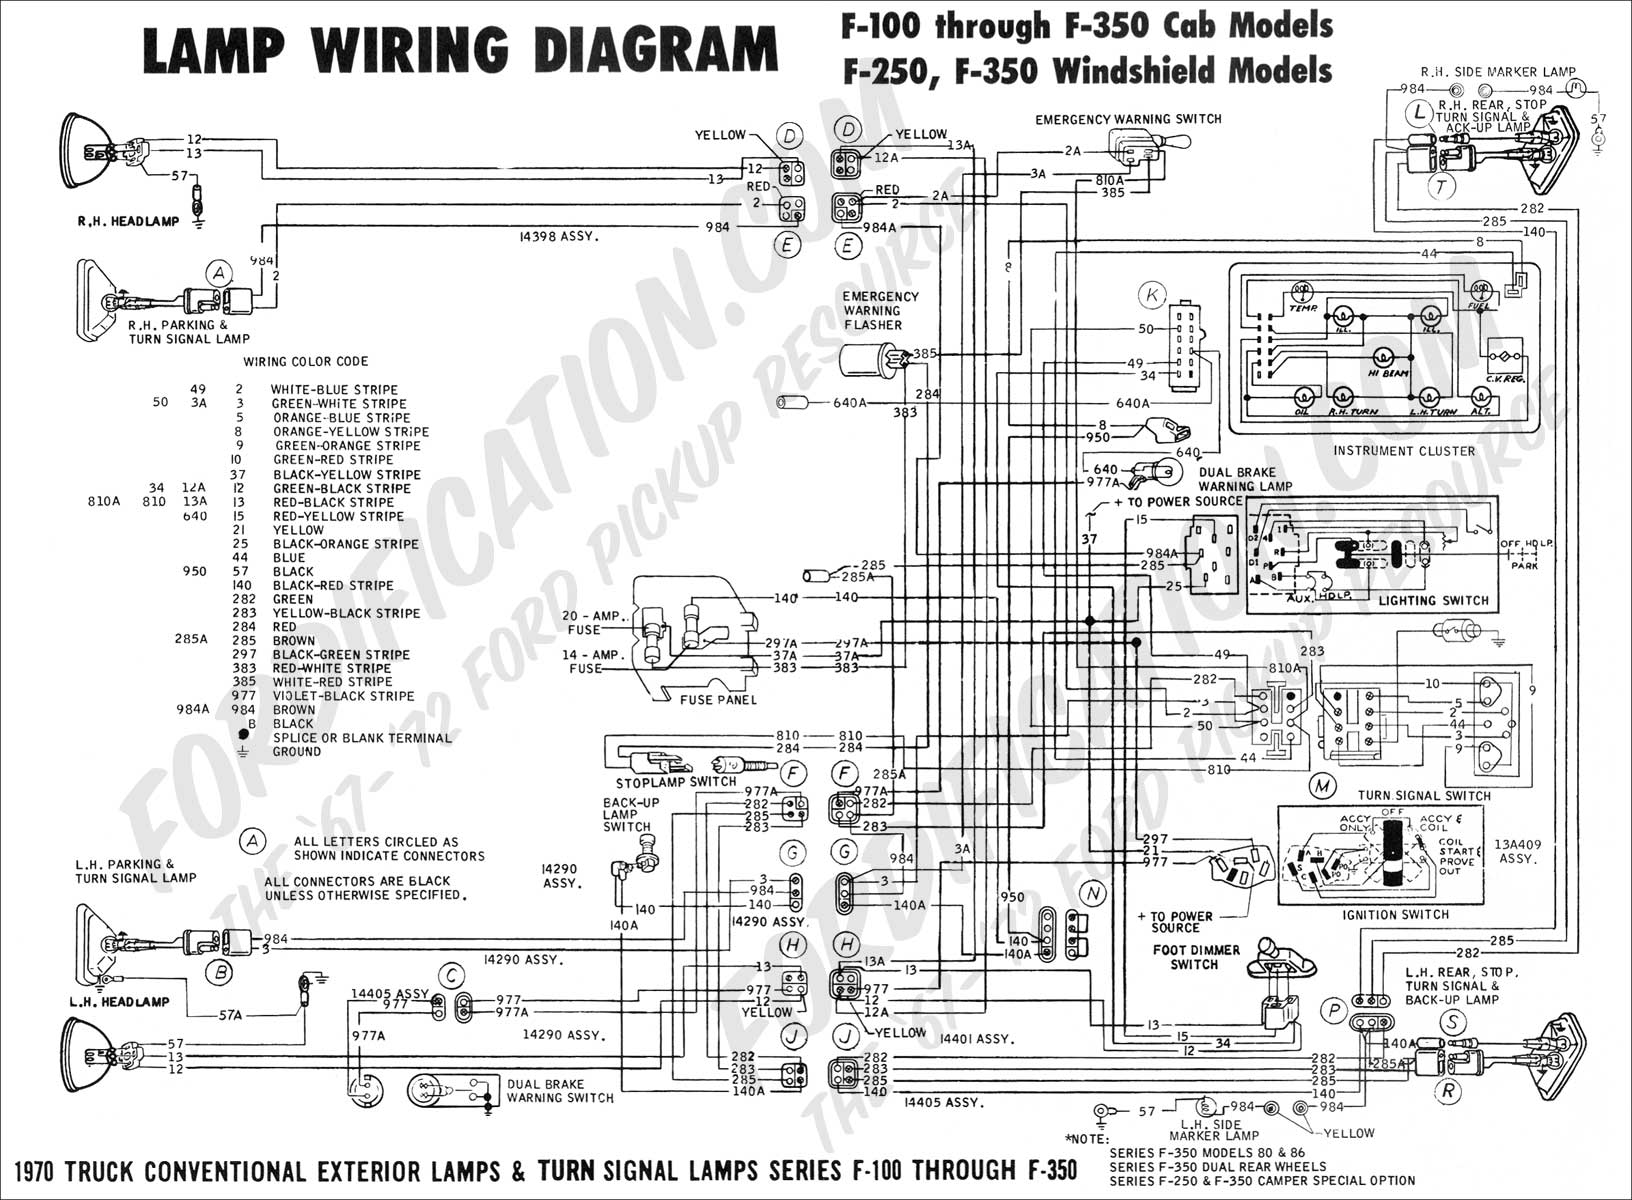 Wiring diagram for 1994 ford l8000 #2